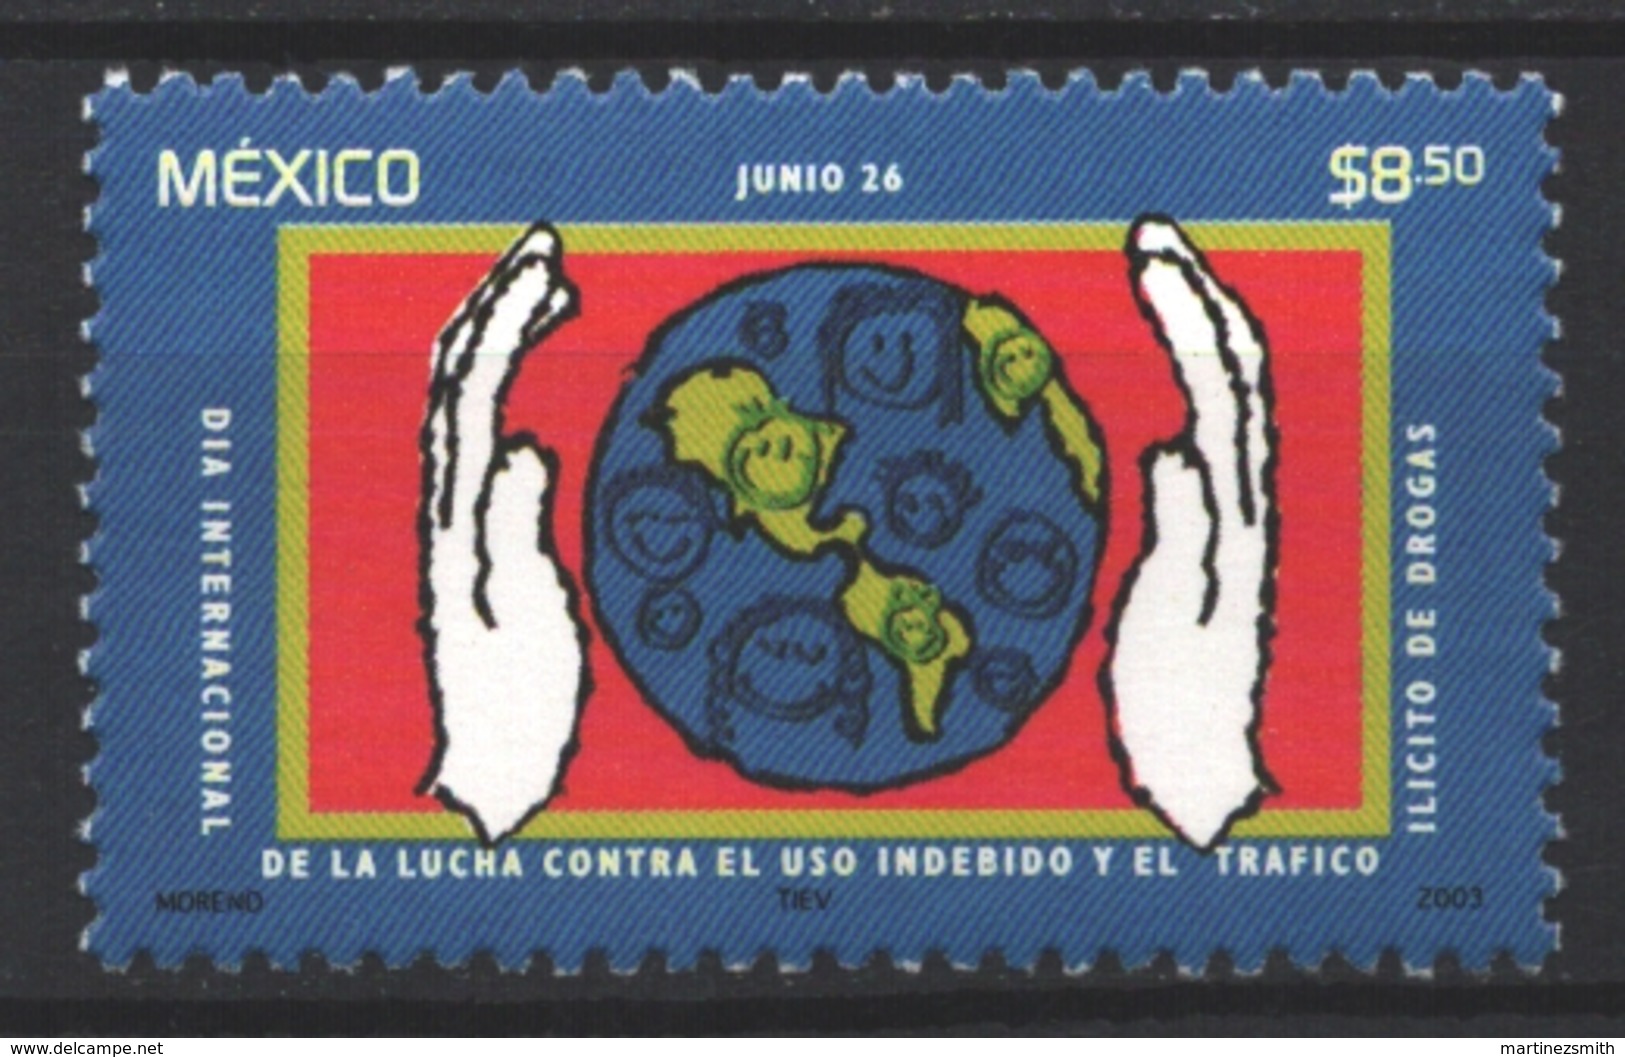 Mexico - Mexique 2003 Yvert 2045, International Day Against Drugs - MNH - México